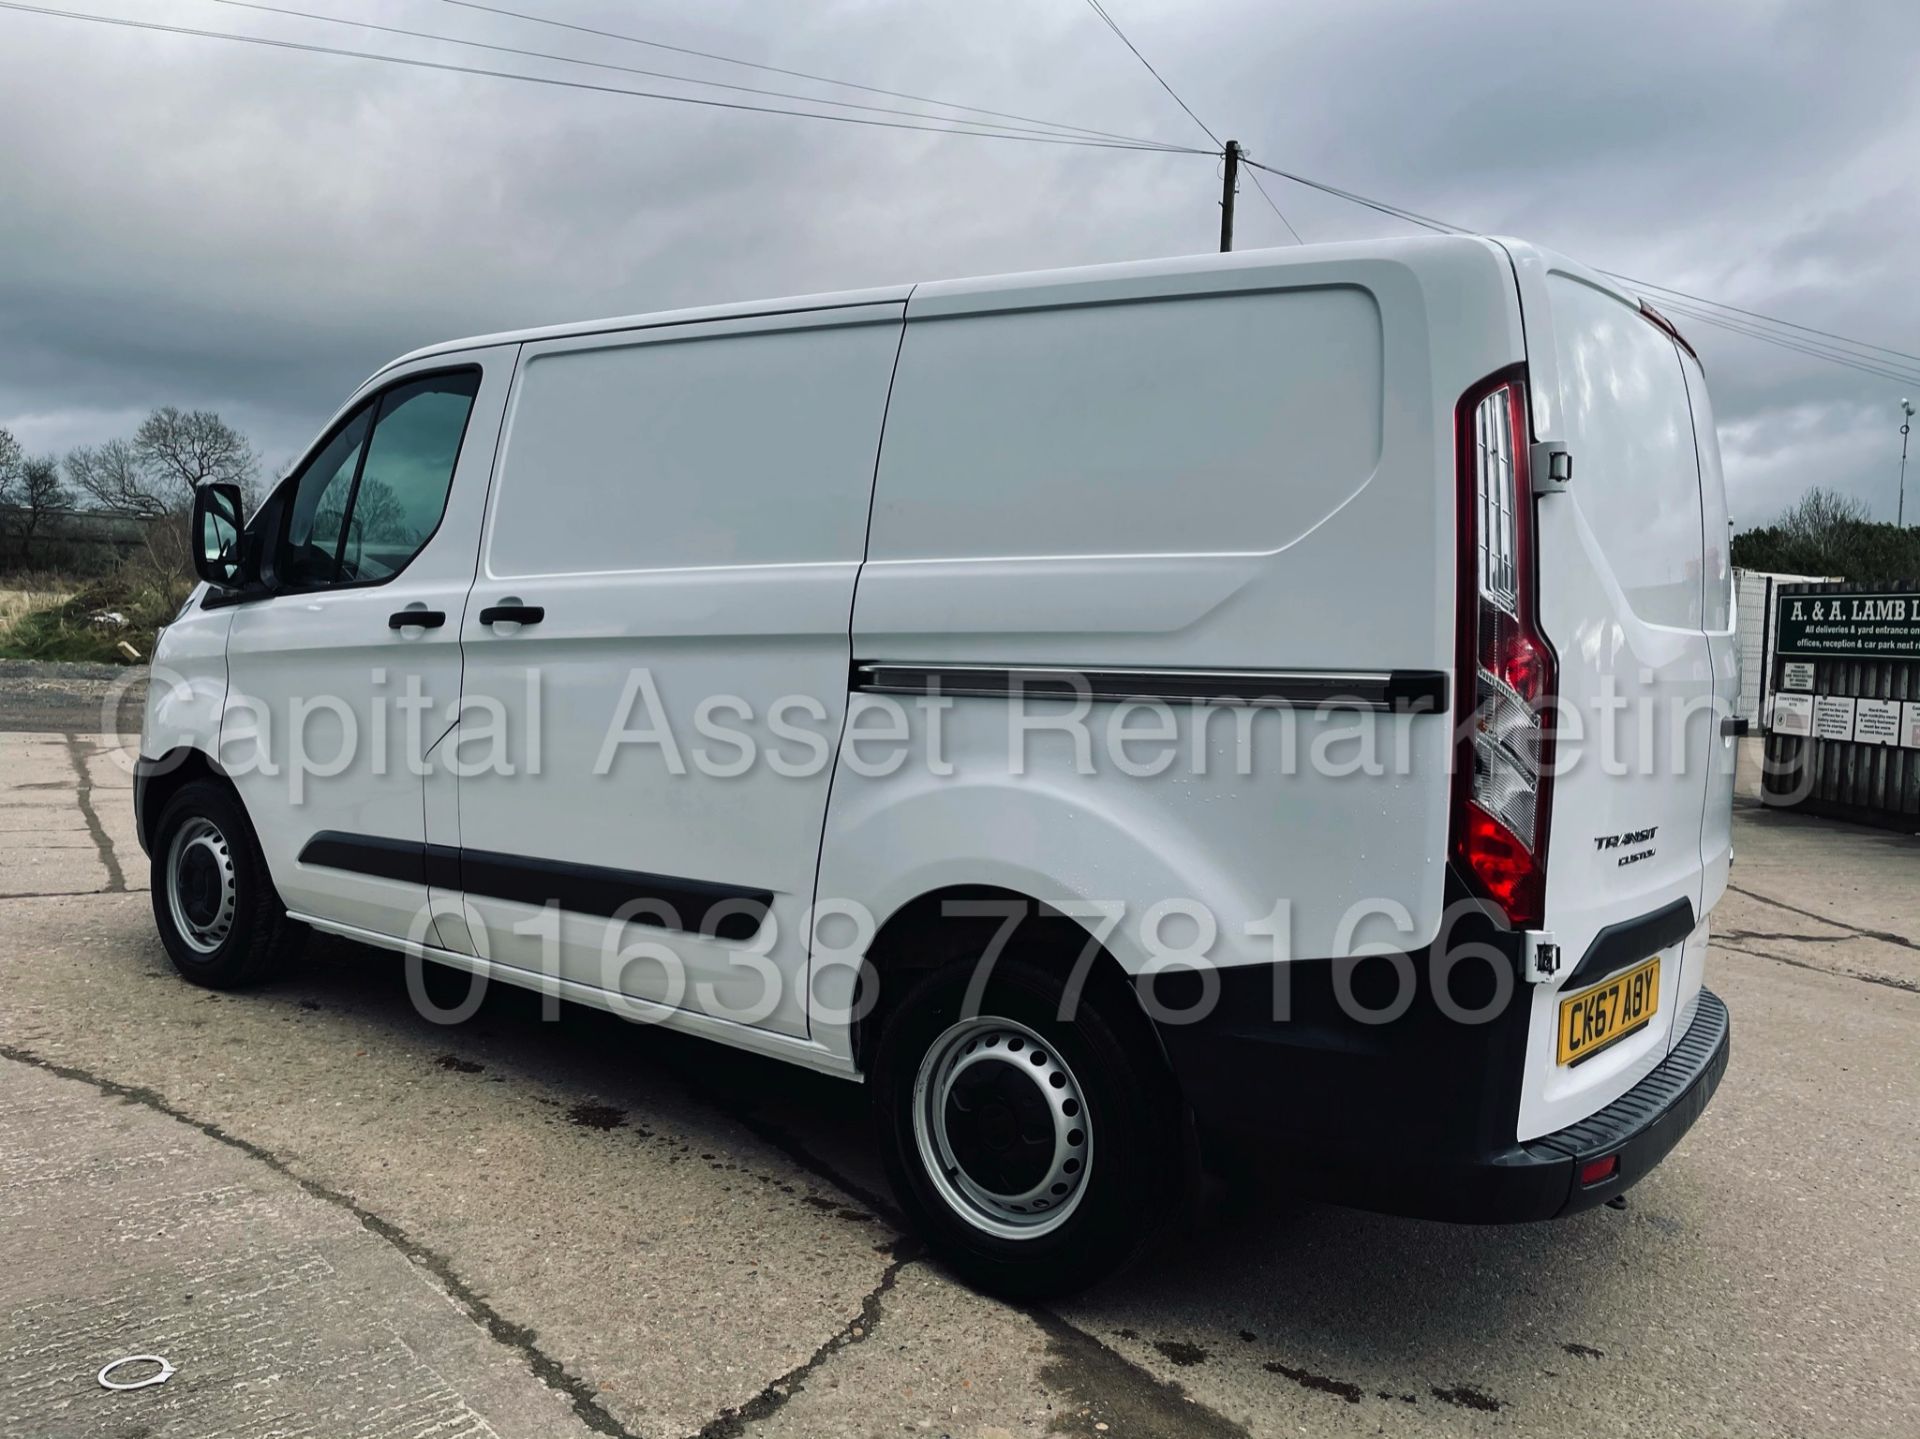 FORD TRANSIT CUSTOM 270 *SWB - PANEL VAN* (2018 - EURO 6) '2.0 TDCI - 6 SPEED' (1 OWNER FROM NEW) - Image 9 of 37